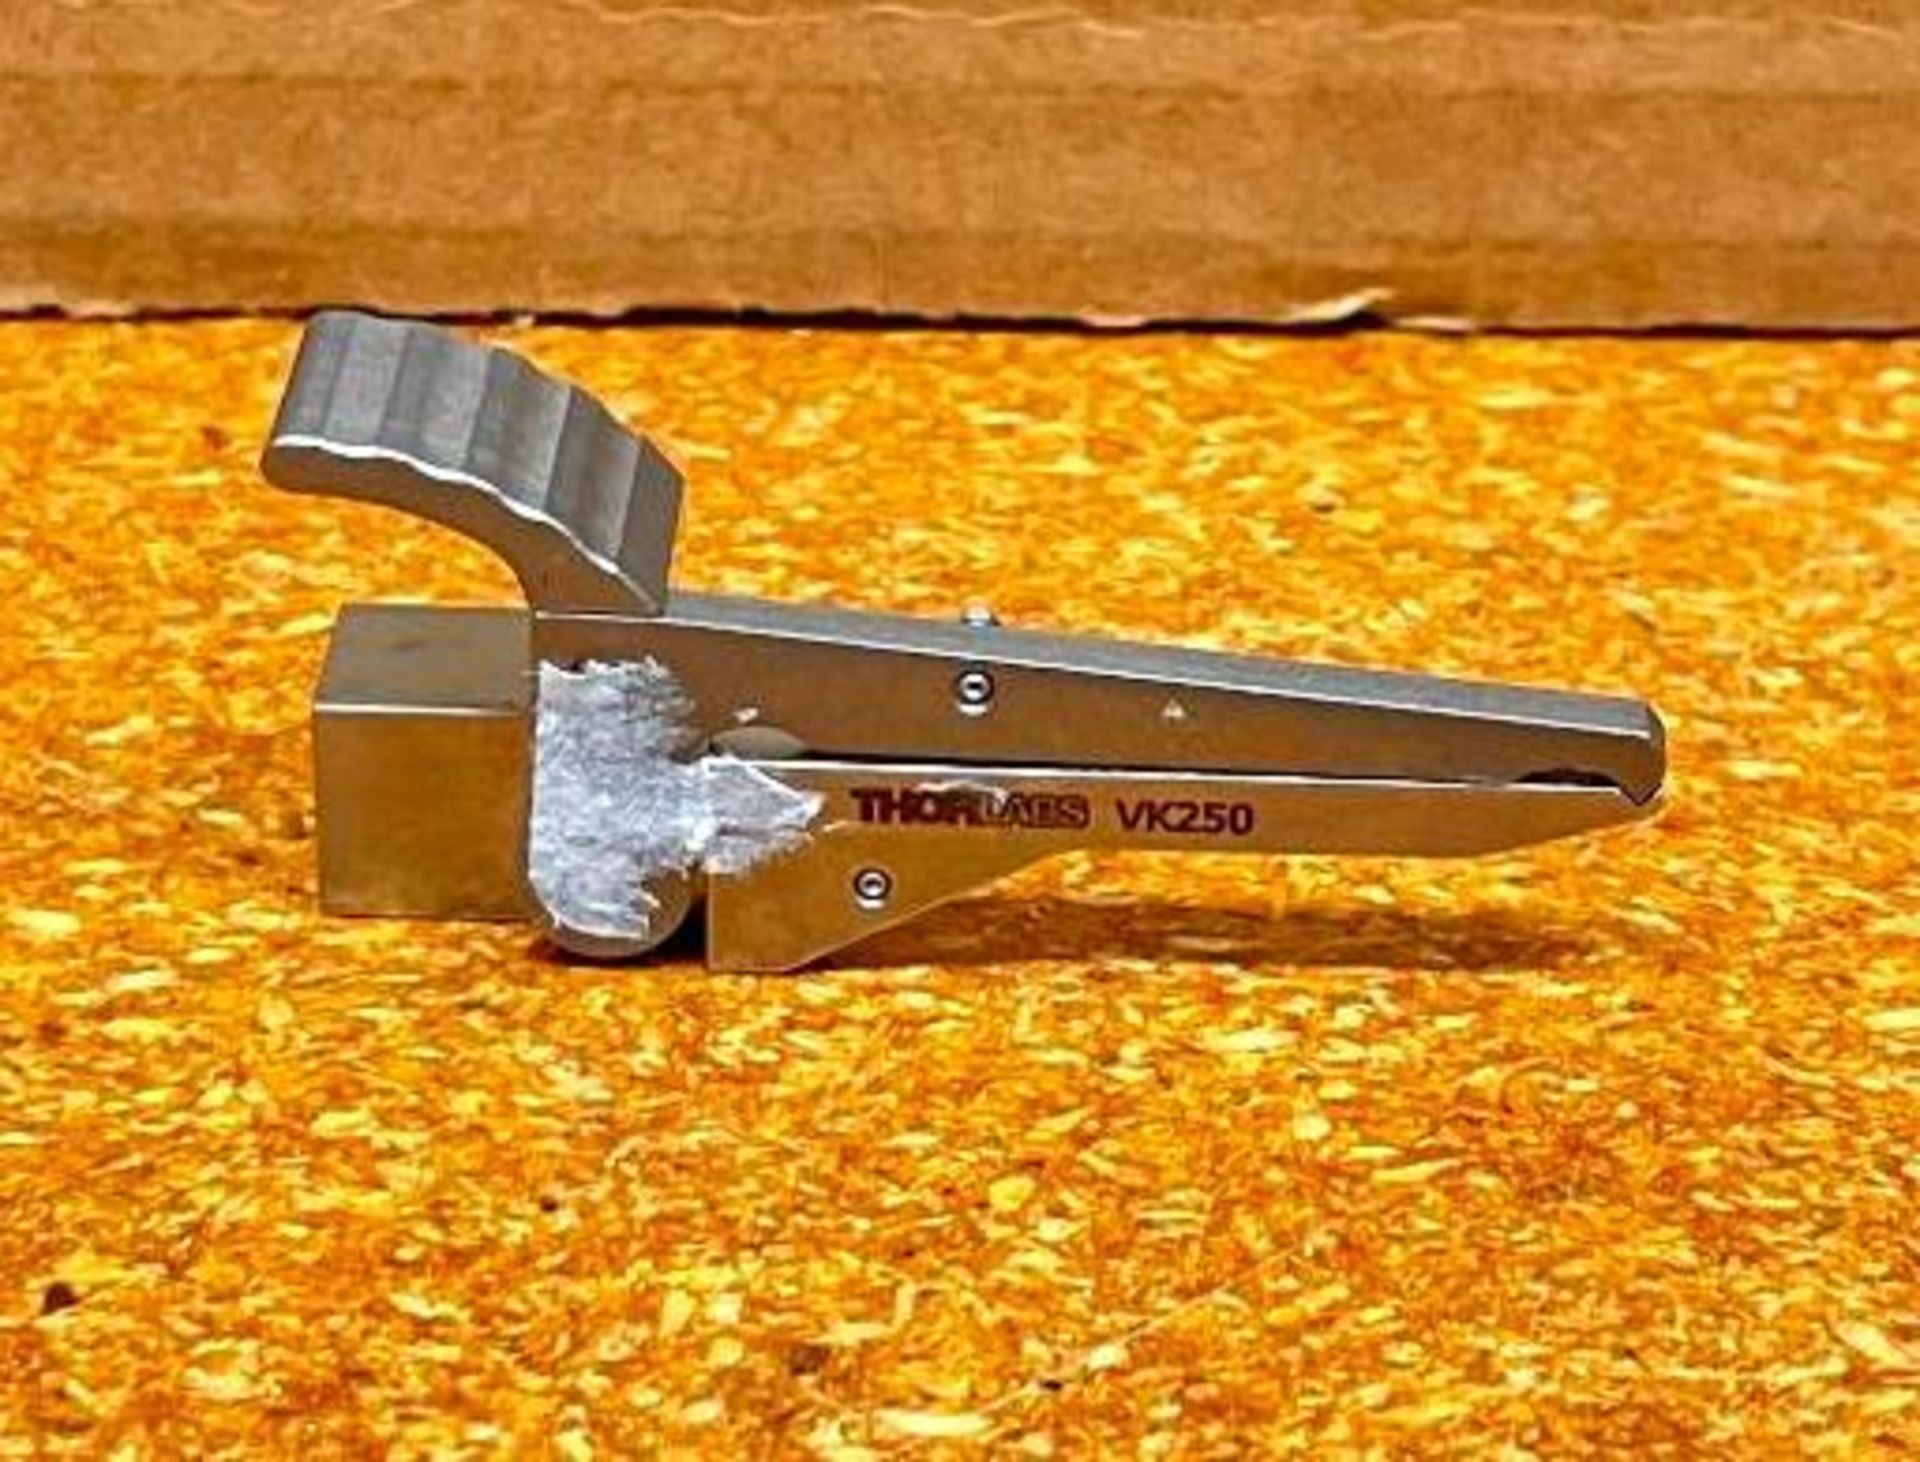 MICRO V-CLAMP BRAND/MODEL: THORLABS VK250 INFORMATION: WITH STAINLESS STEEL BLADES RETAIL$: $145 ORI